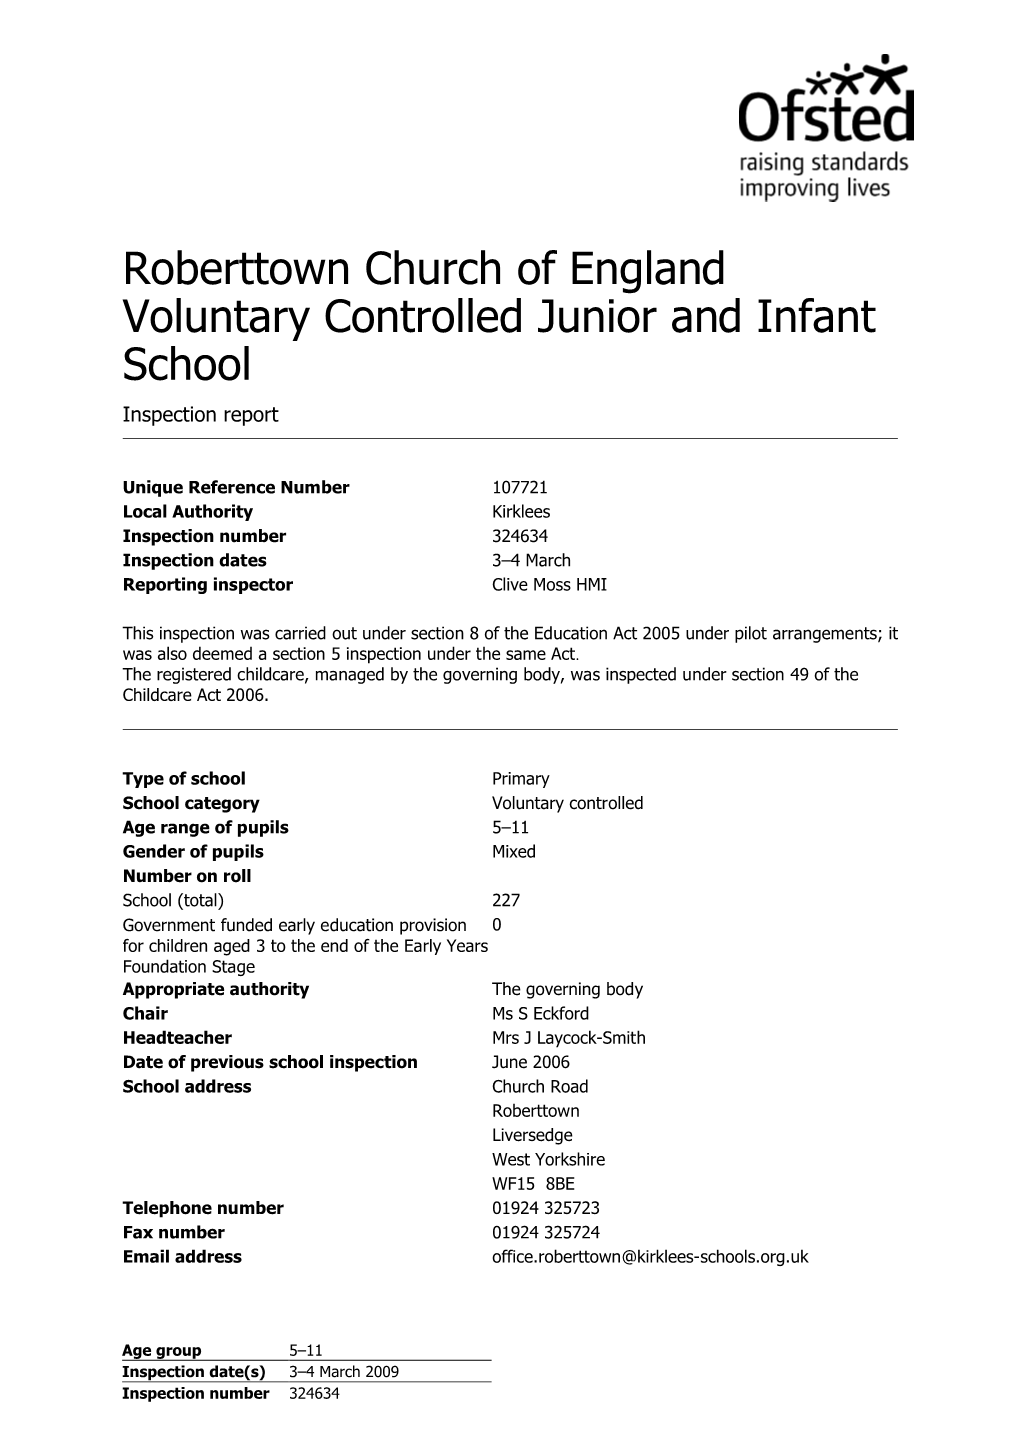 Roberttown Church of England Voluntary Controlled Junior and Infant School Inspection Report